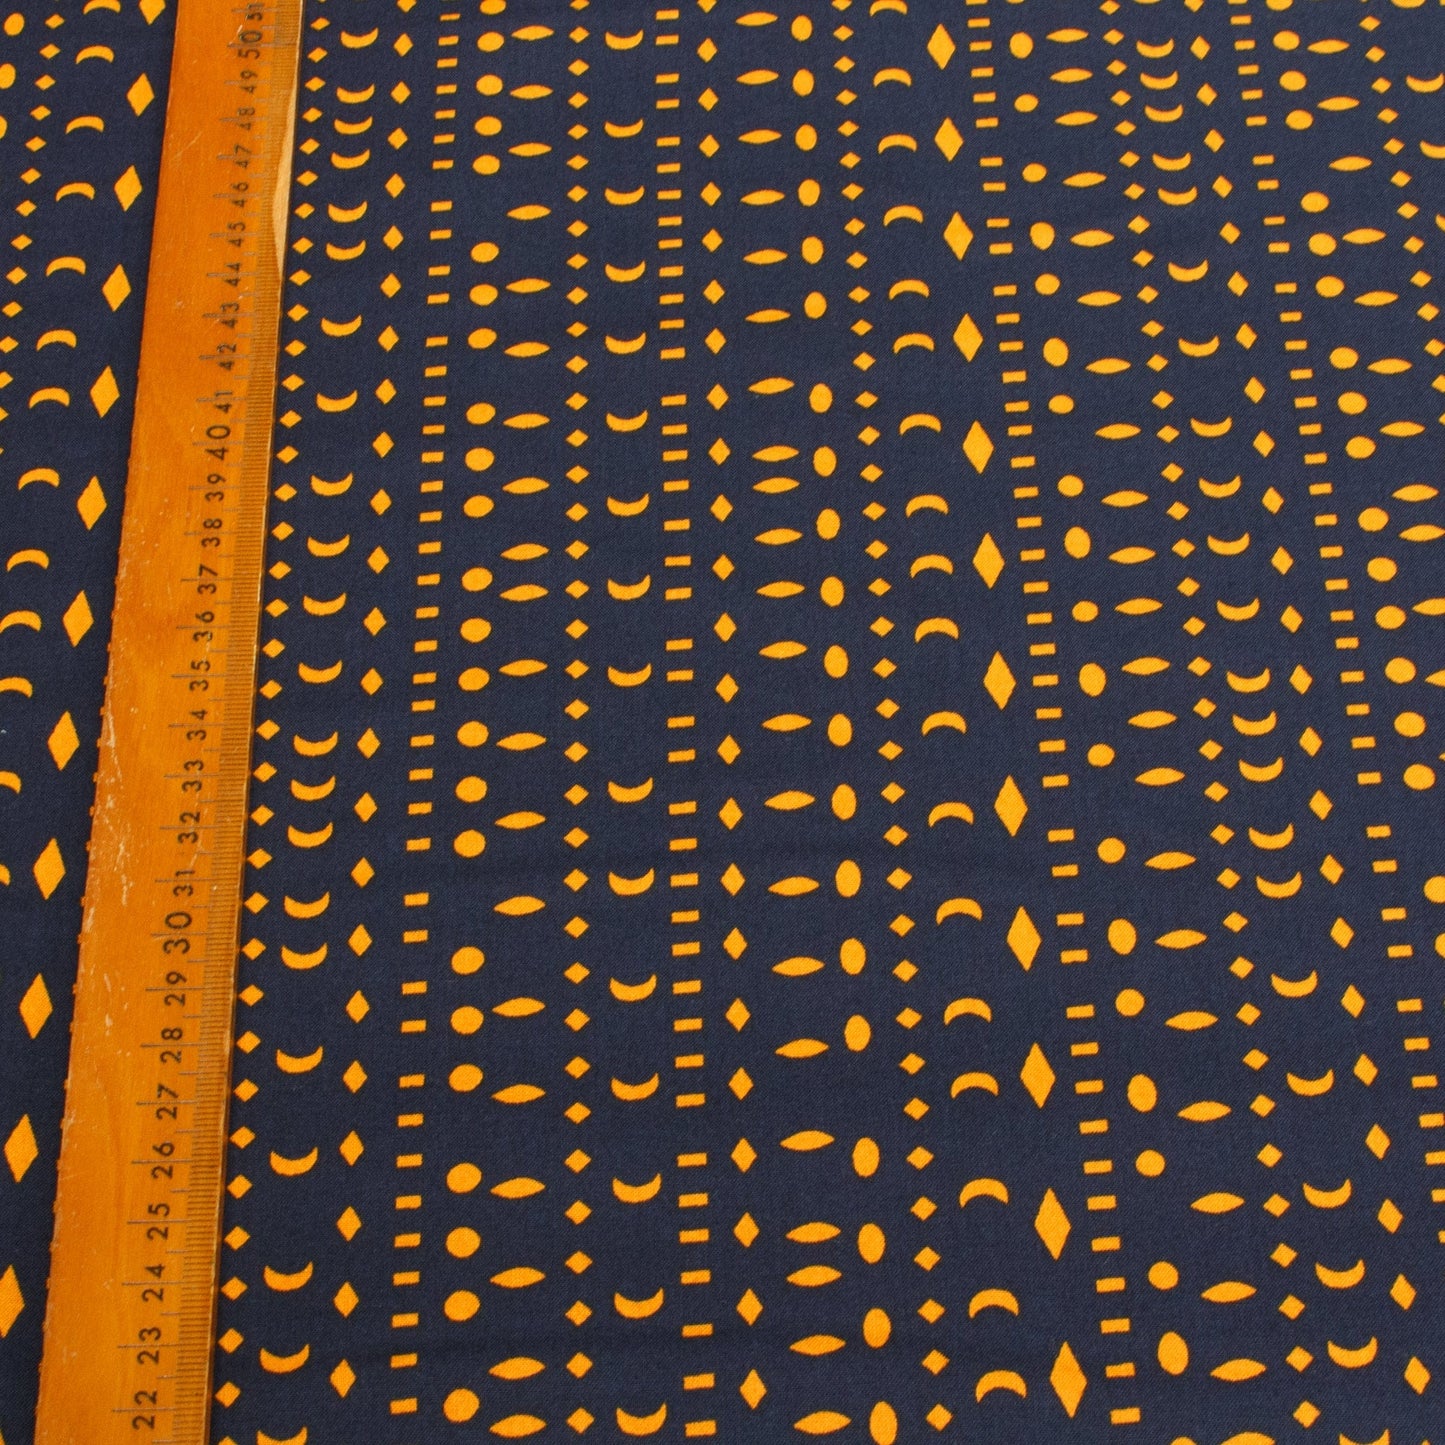 Ruby Star Society 'Moonglow' Quilting Cotton 'Phases' in Indigo